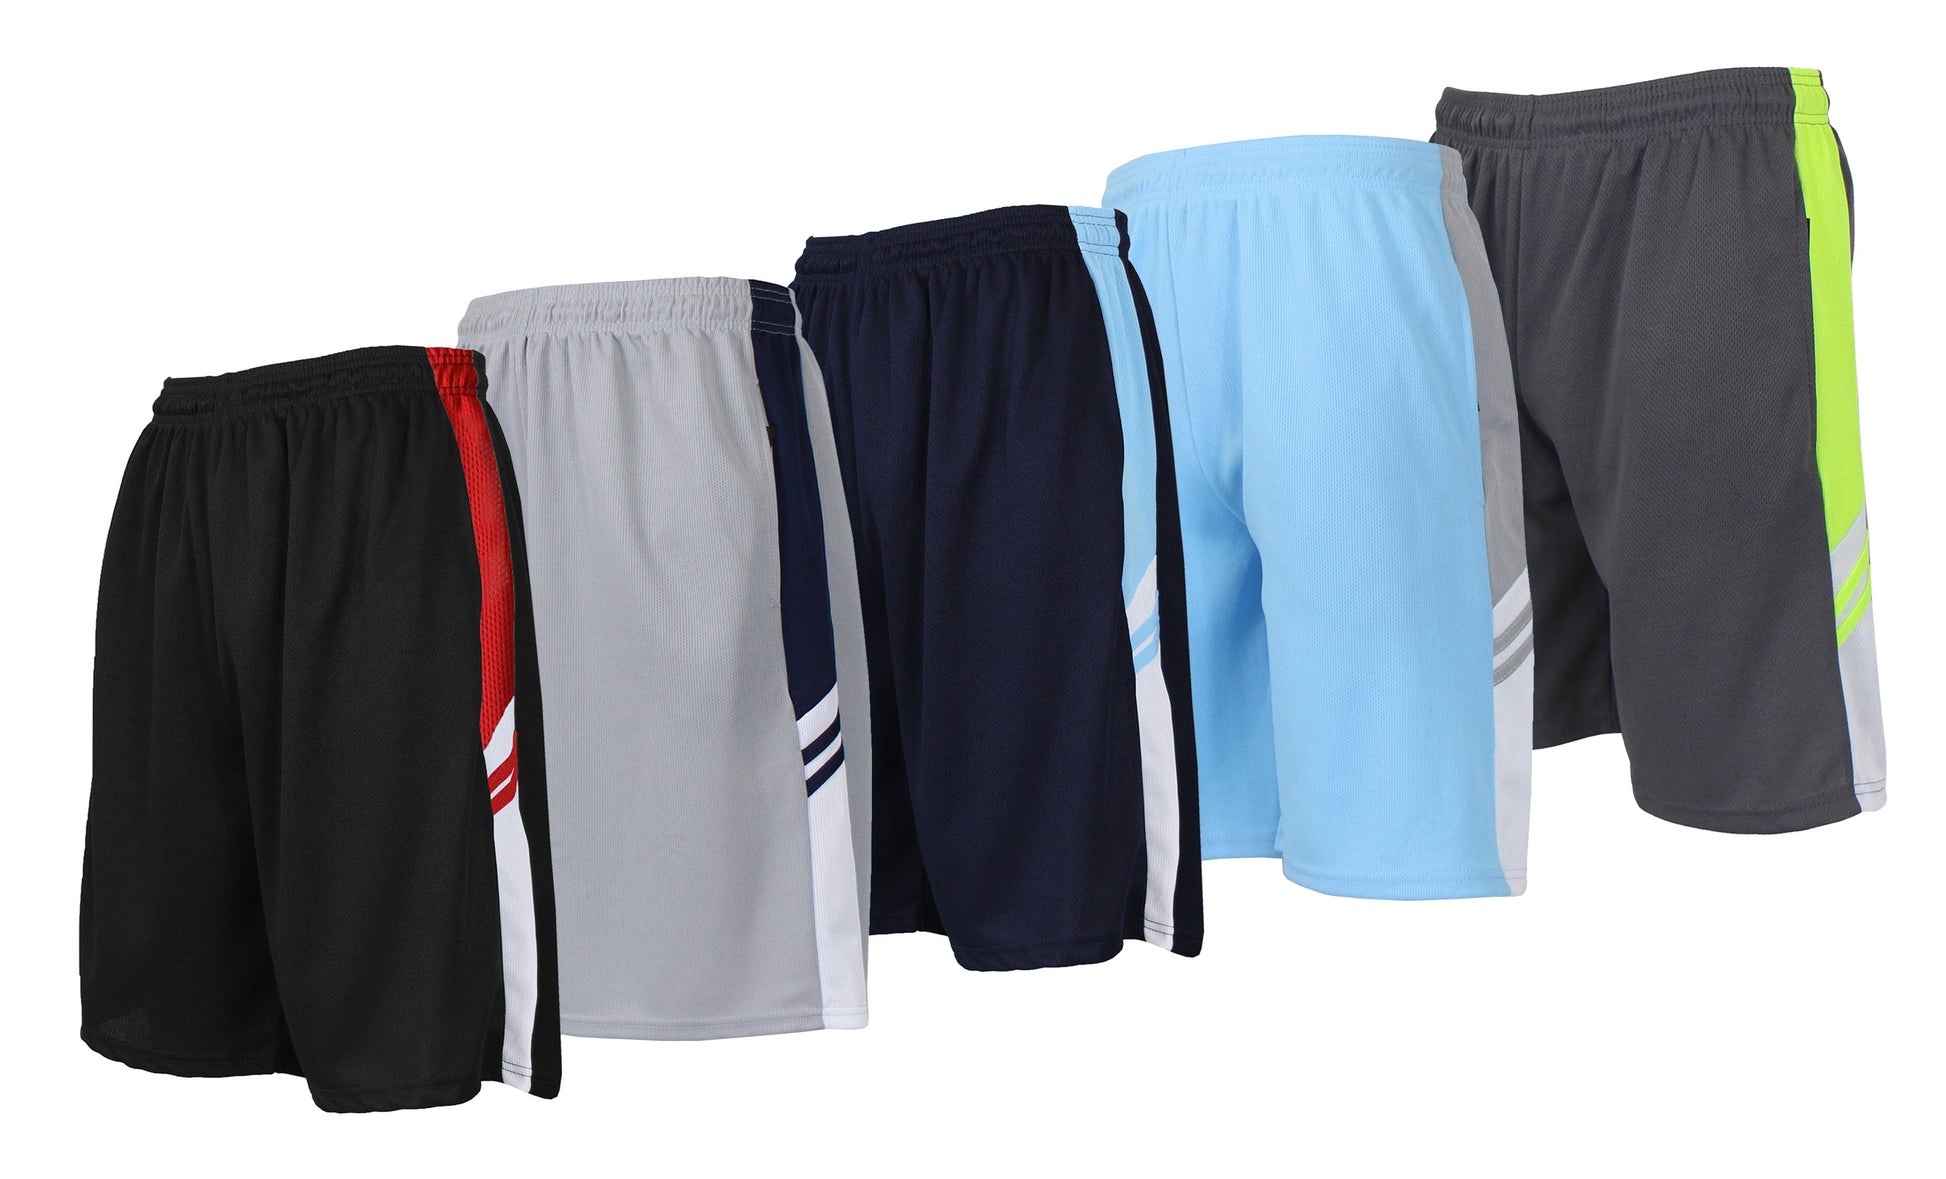 [5 PACK] Men's Active Mesh Moisture Wicking Shorts with Side Design